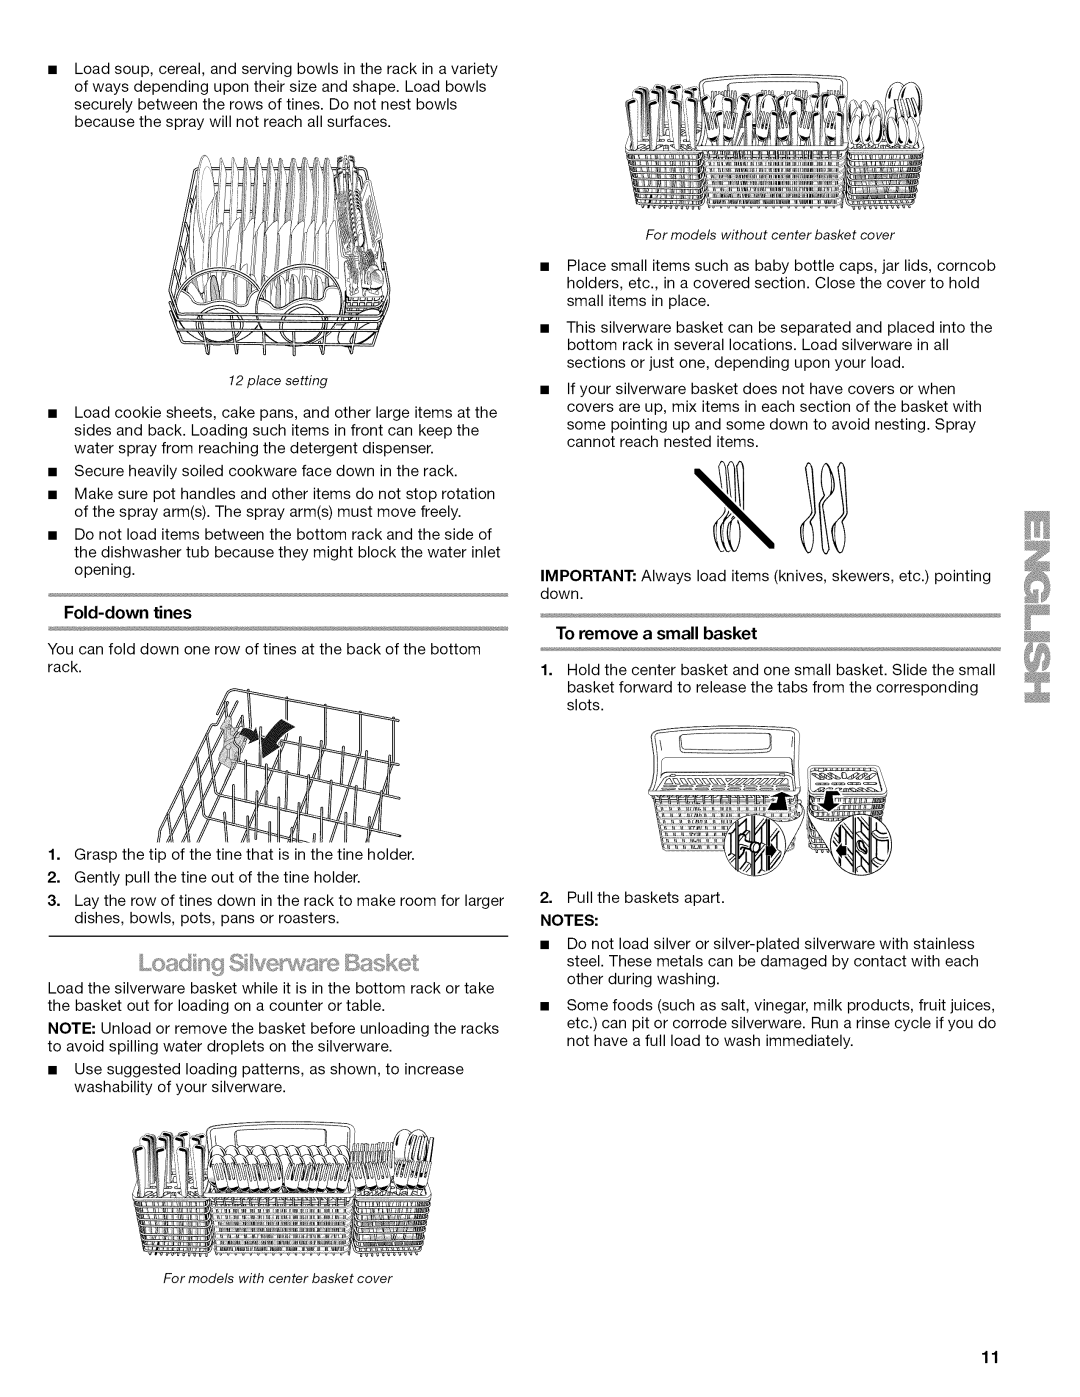 Kenmore 665.1622 manual To remove a small basket, Fold-downtines, Notes 